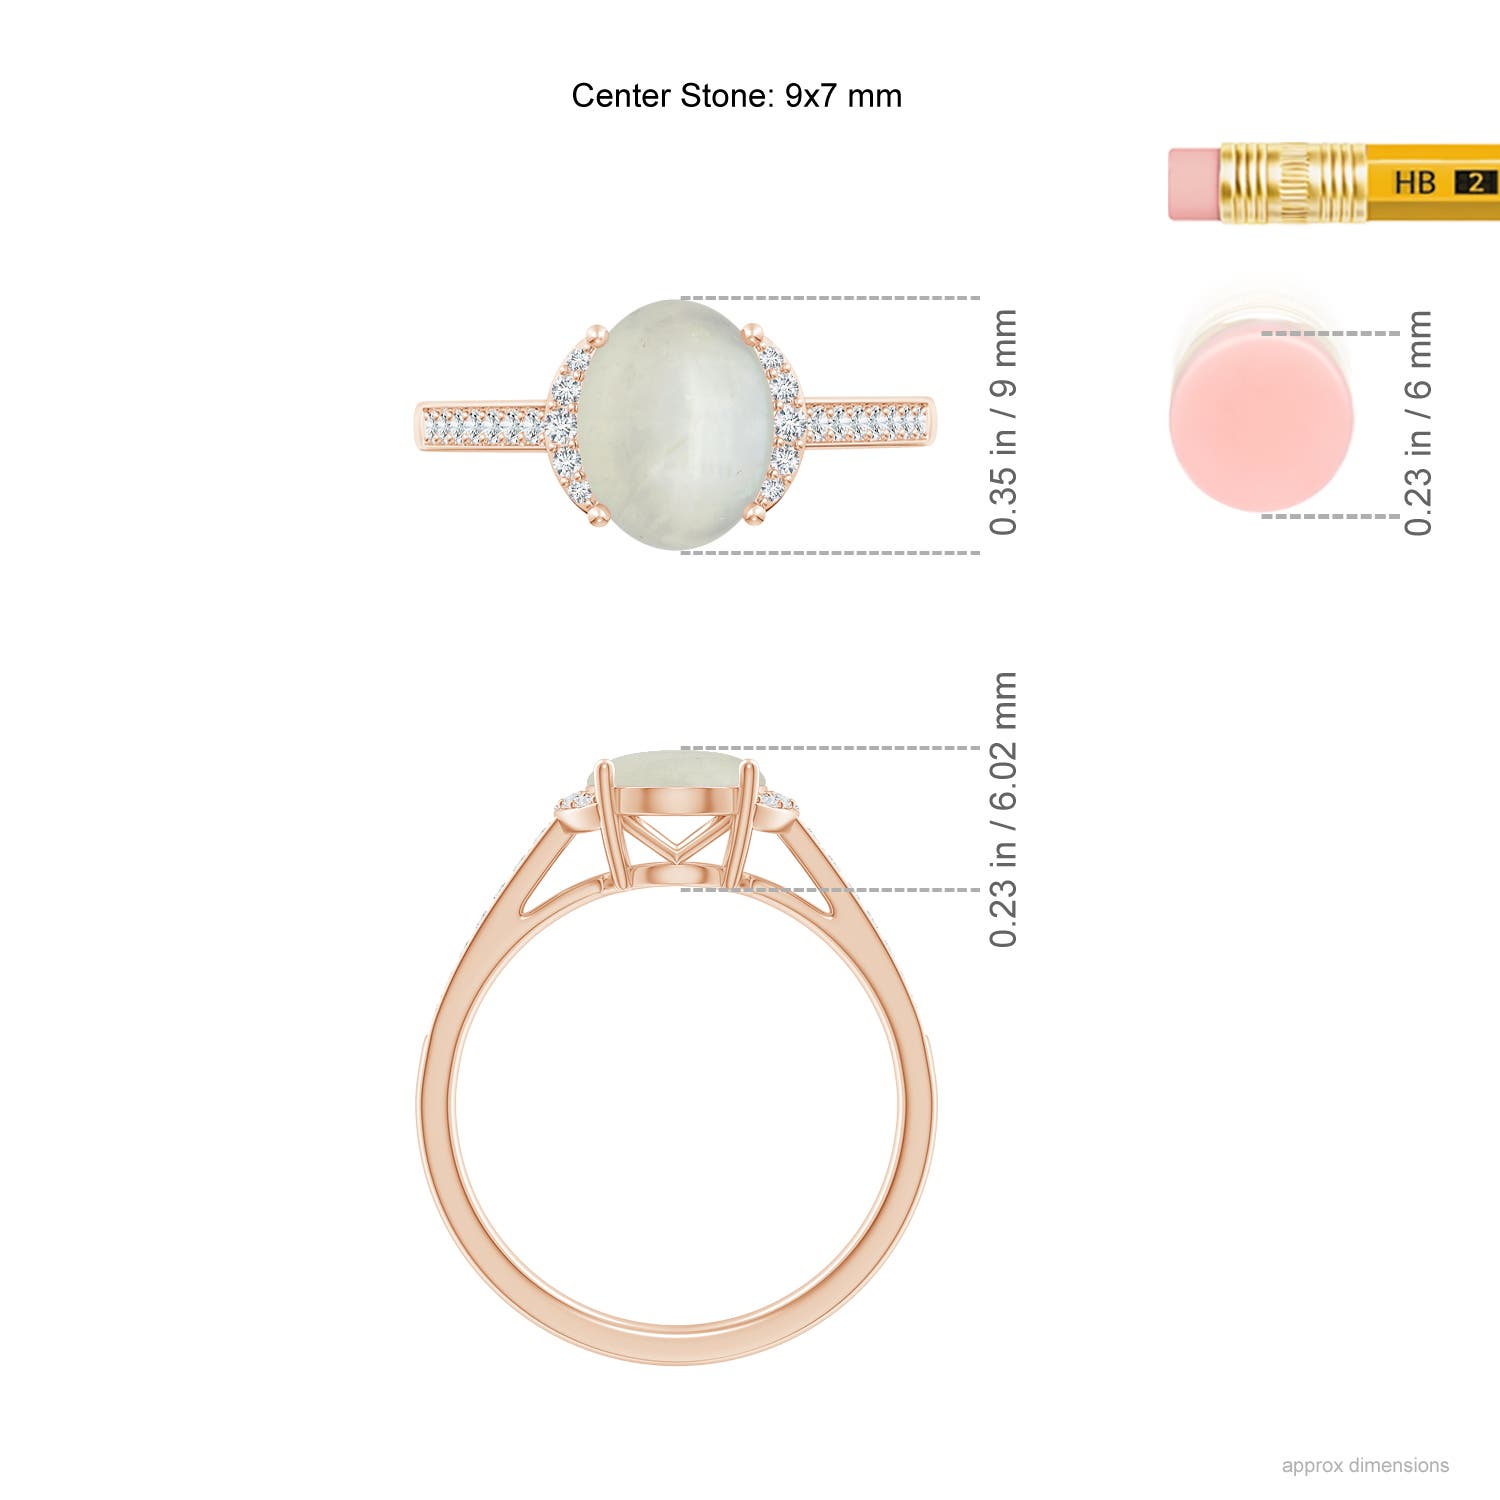 AA - Moonstone / 1.88 CT / 14 KT Rose Gold